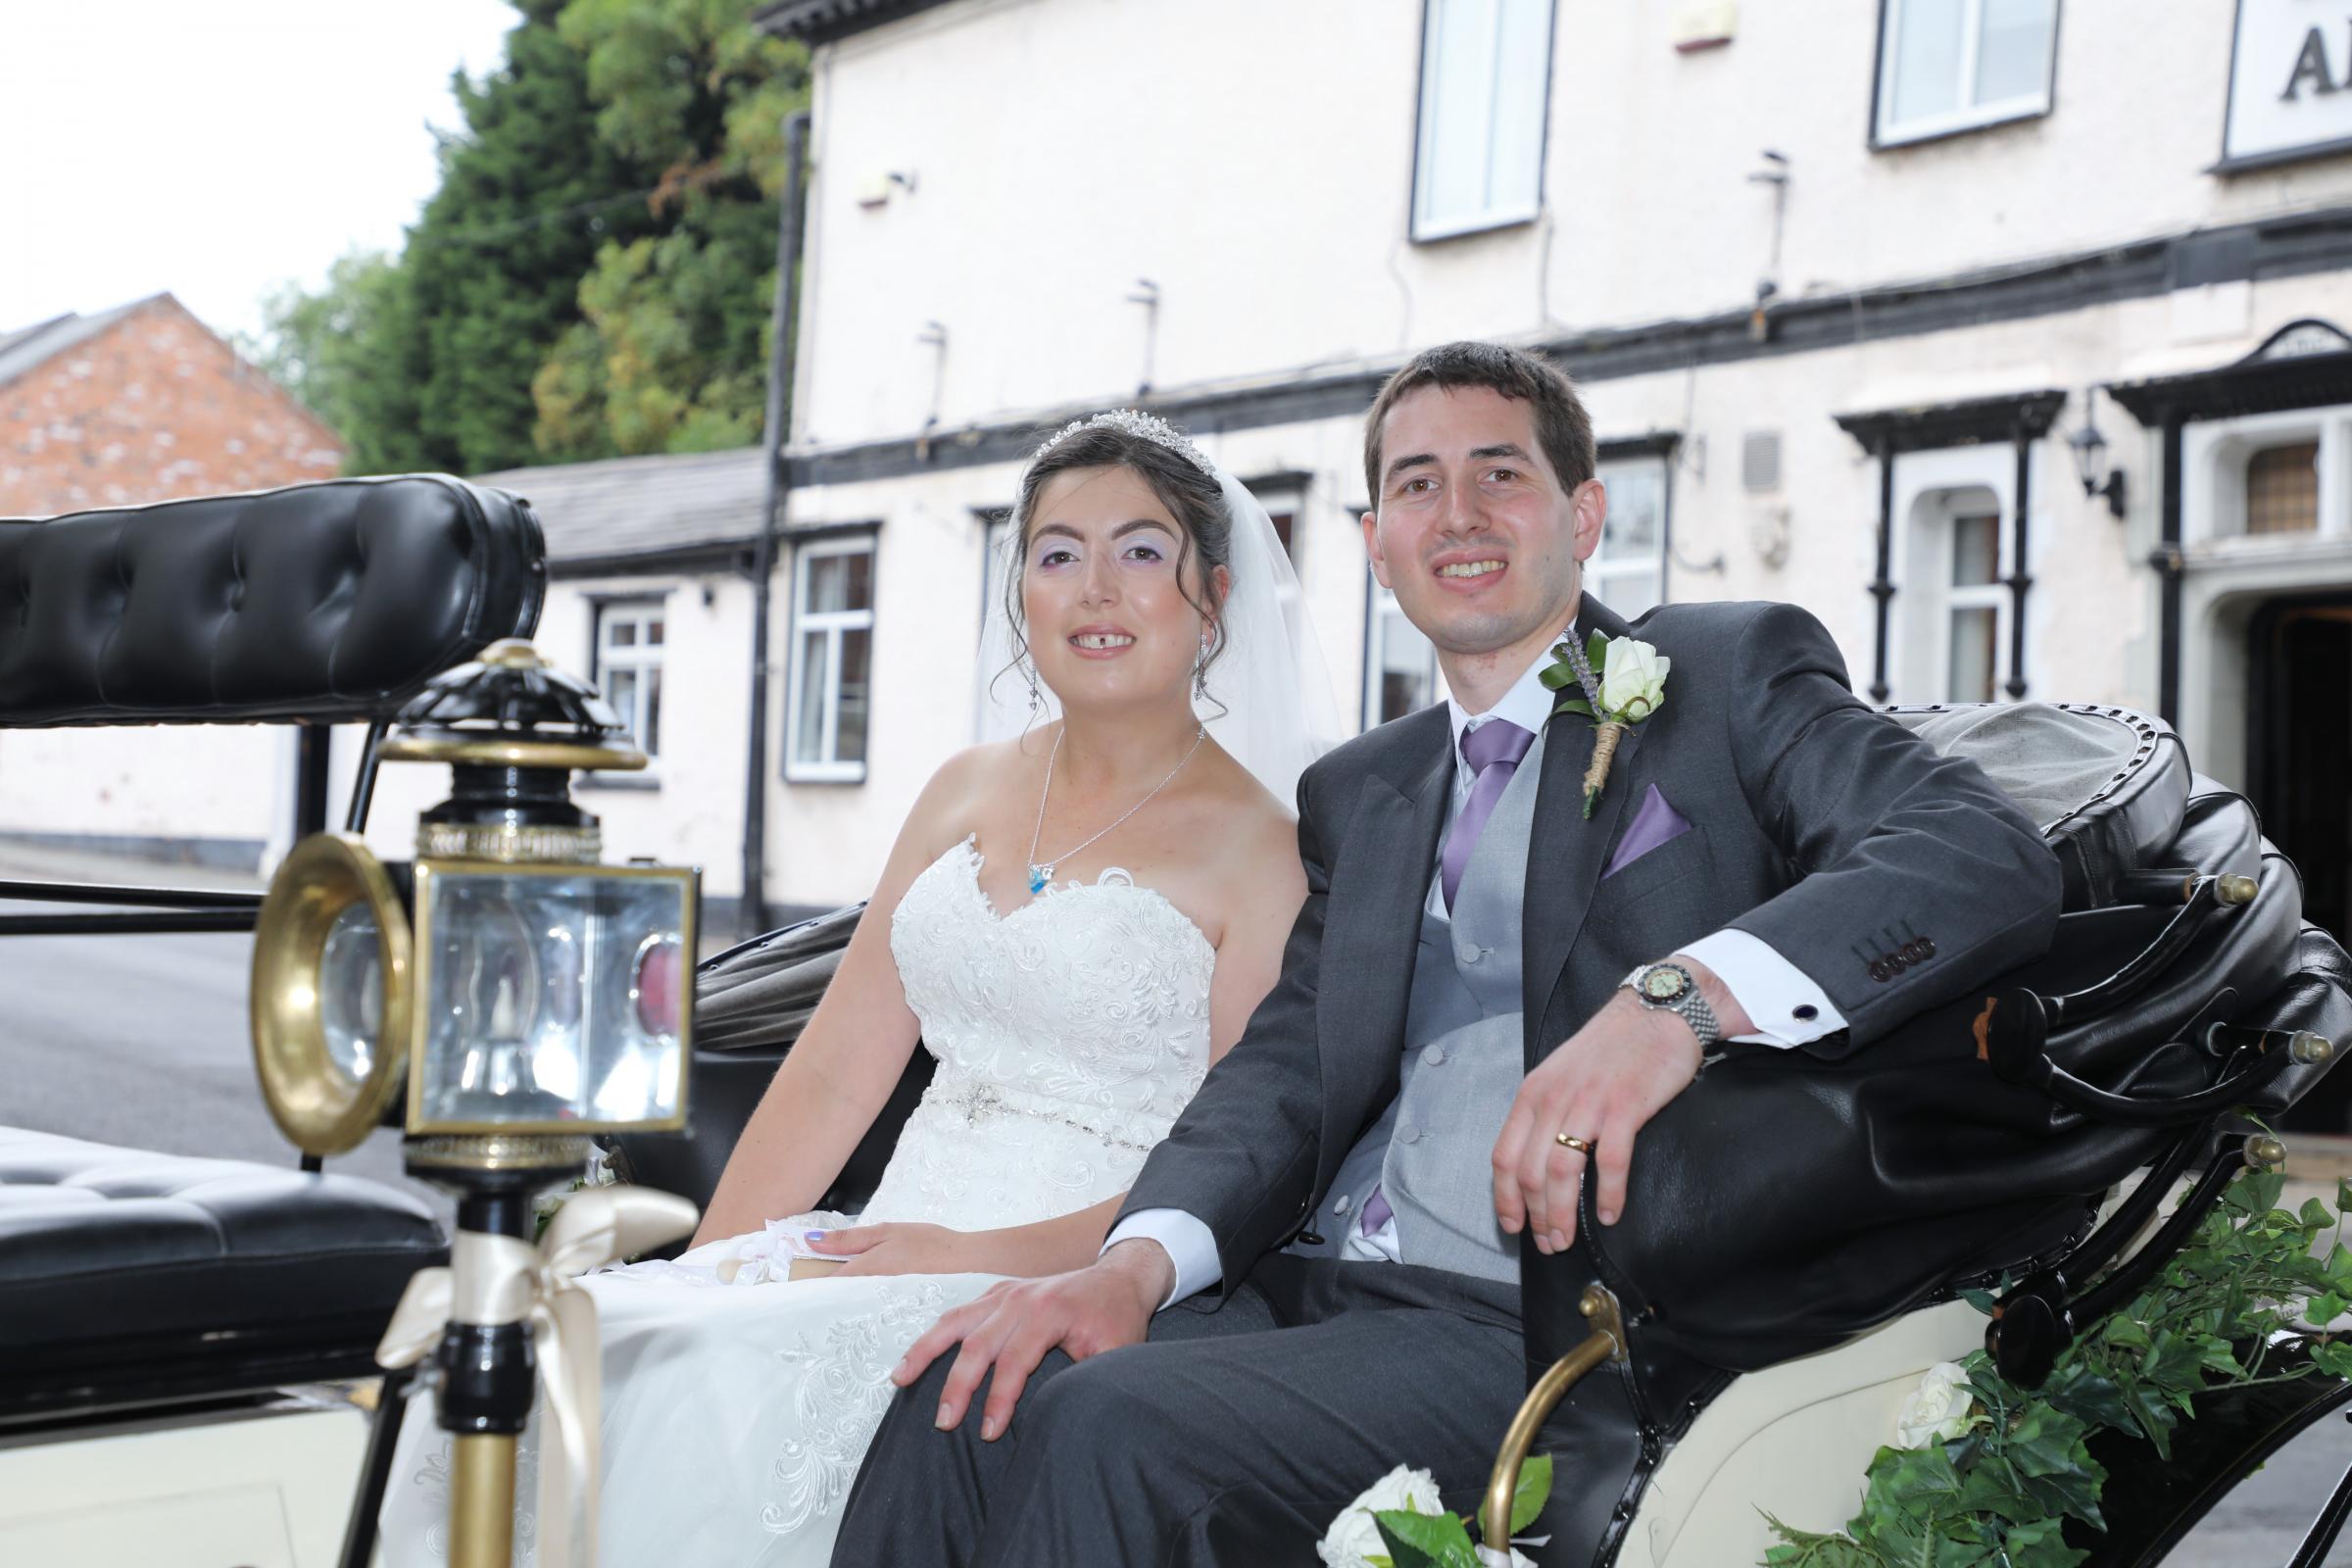 Emma and Charles enjoyed a horse drawn carriage ride on their wedding day